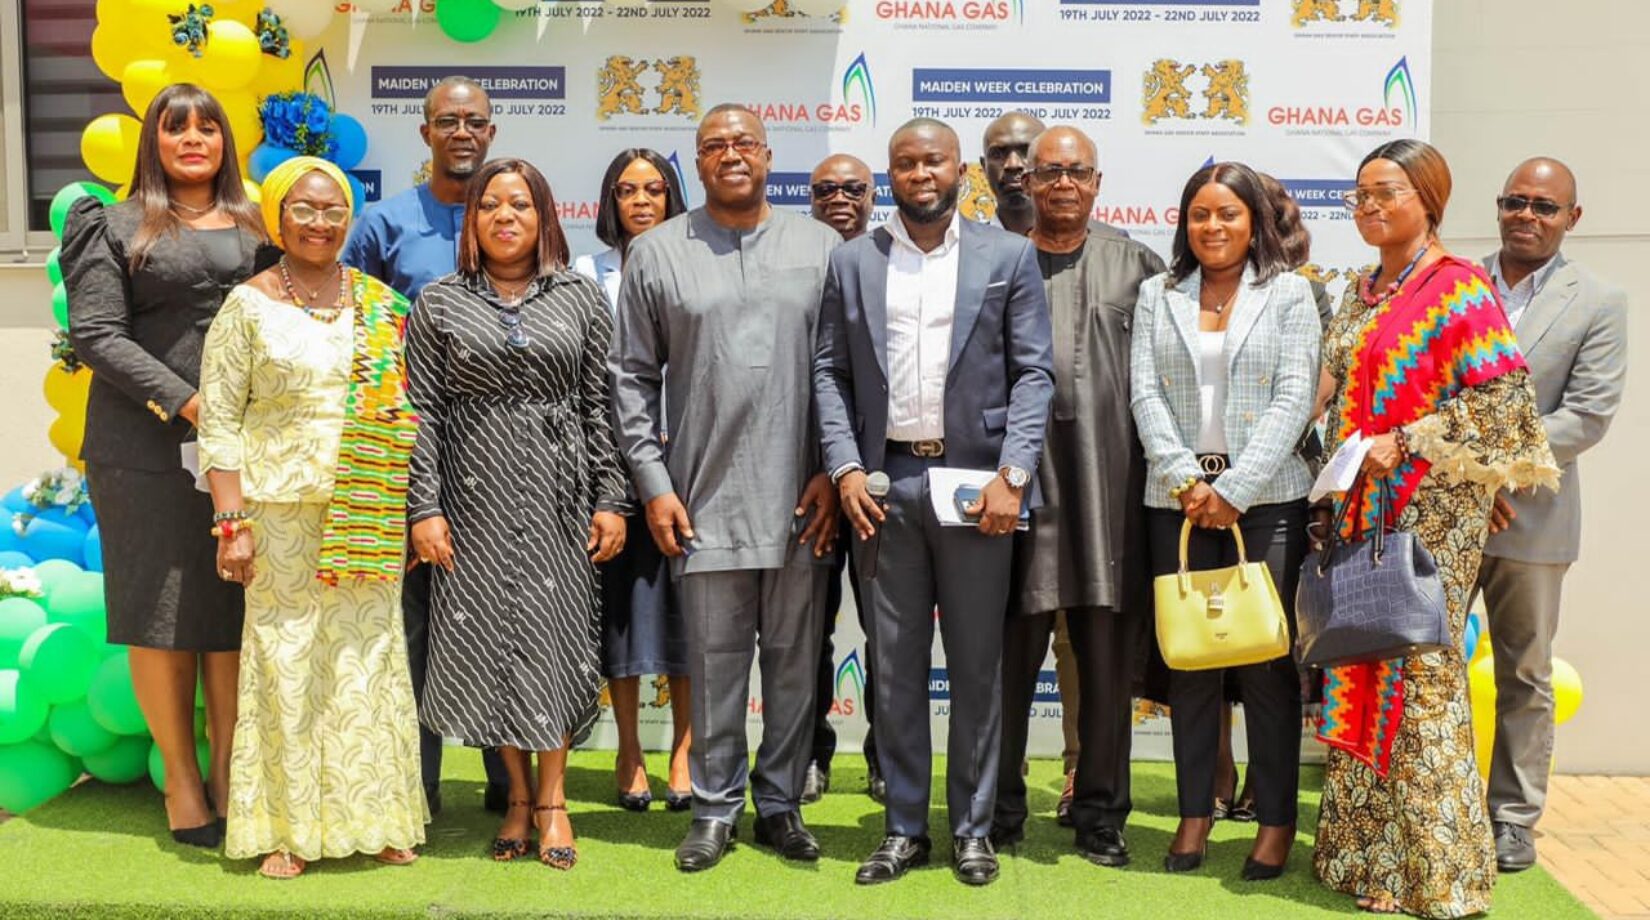 Ghana Gas Company CEO launches Maiden Senior Staff Association Week in Accra